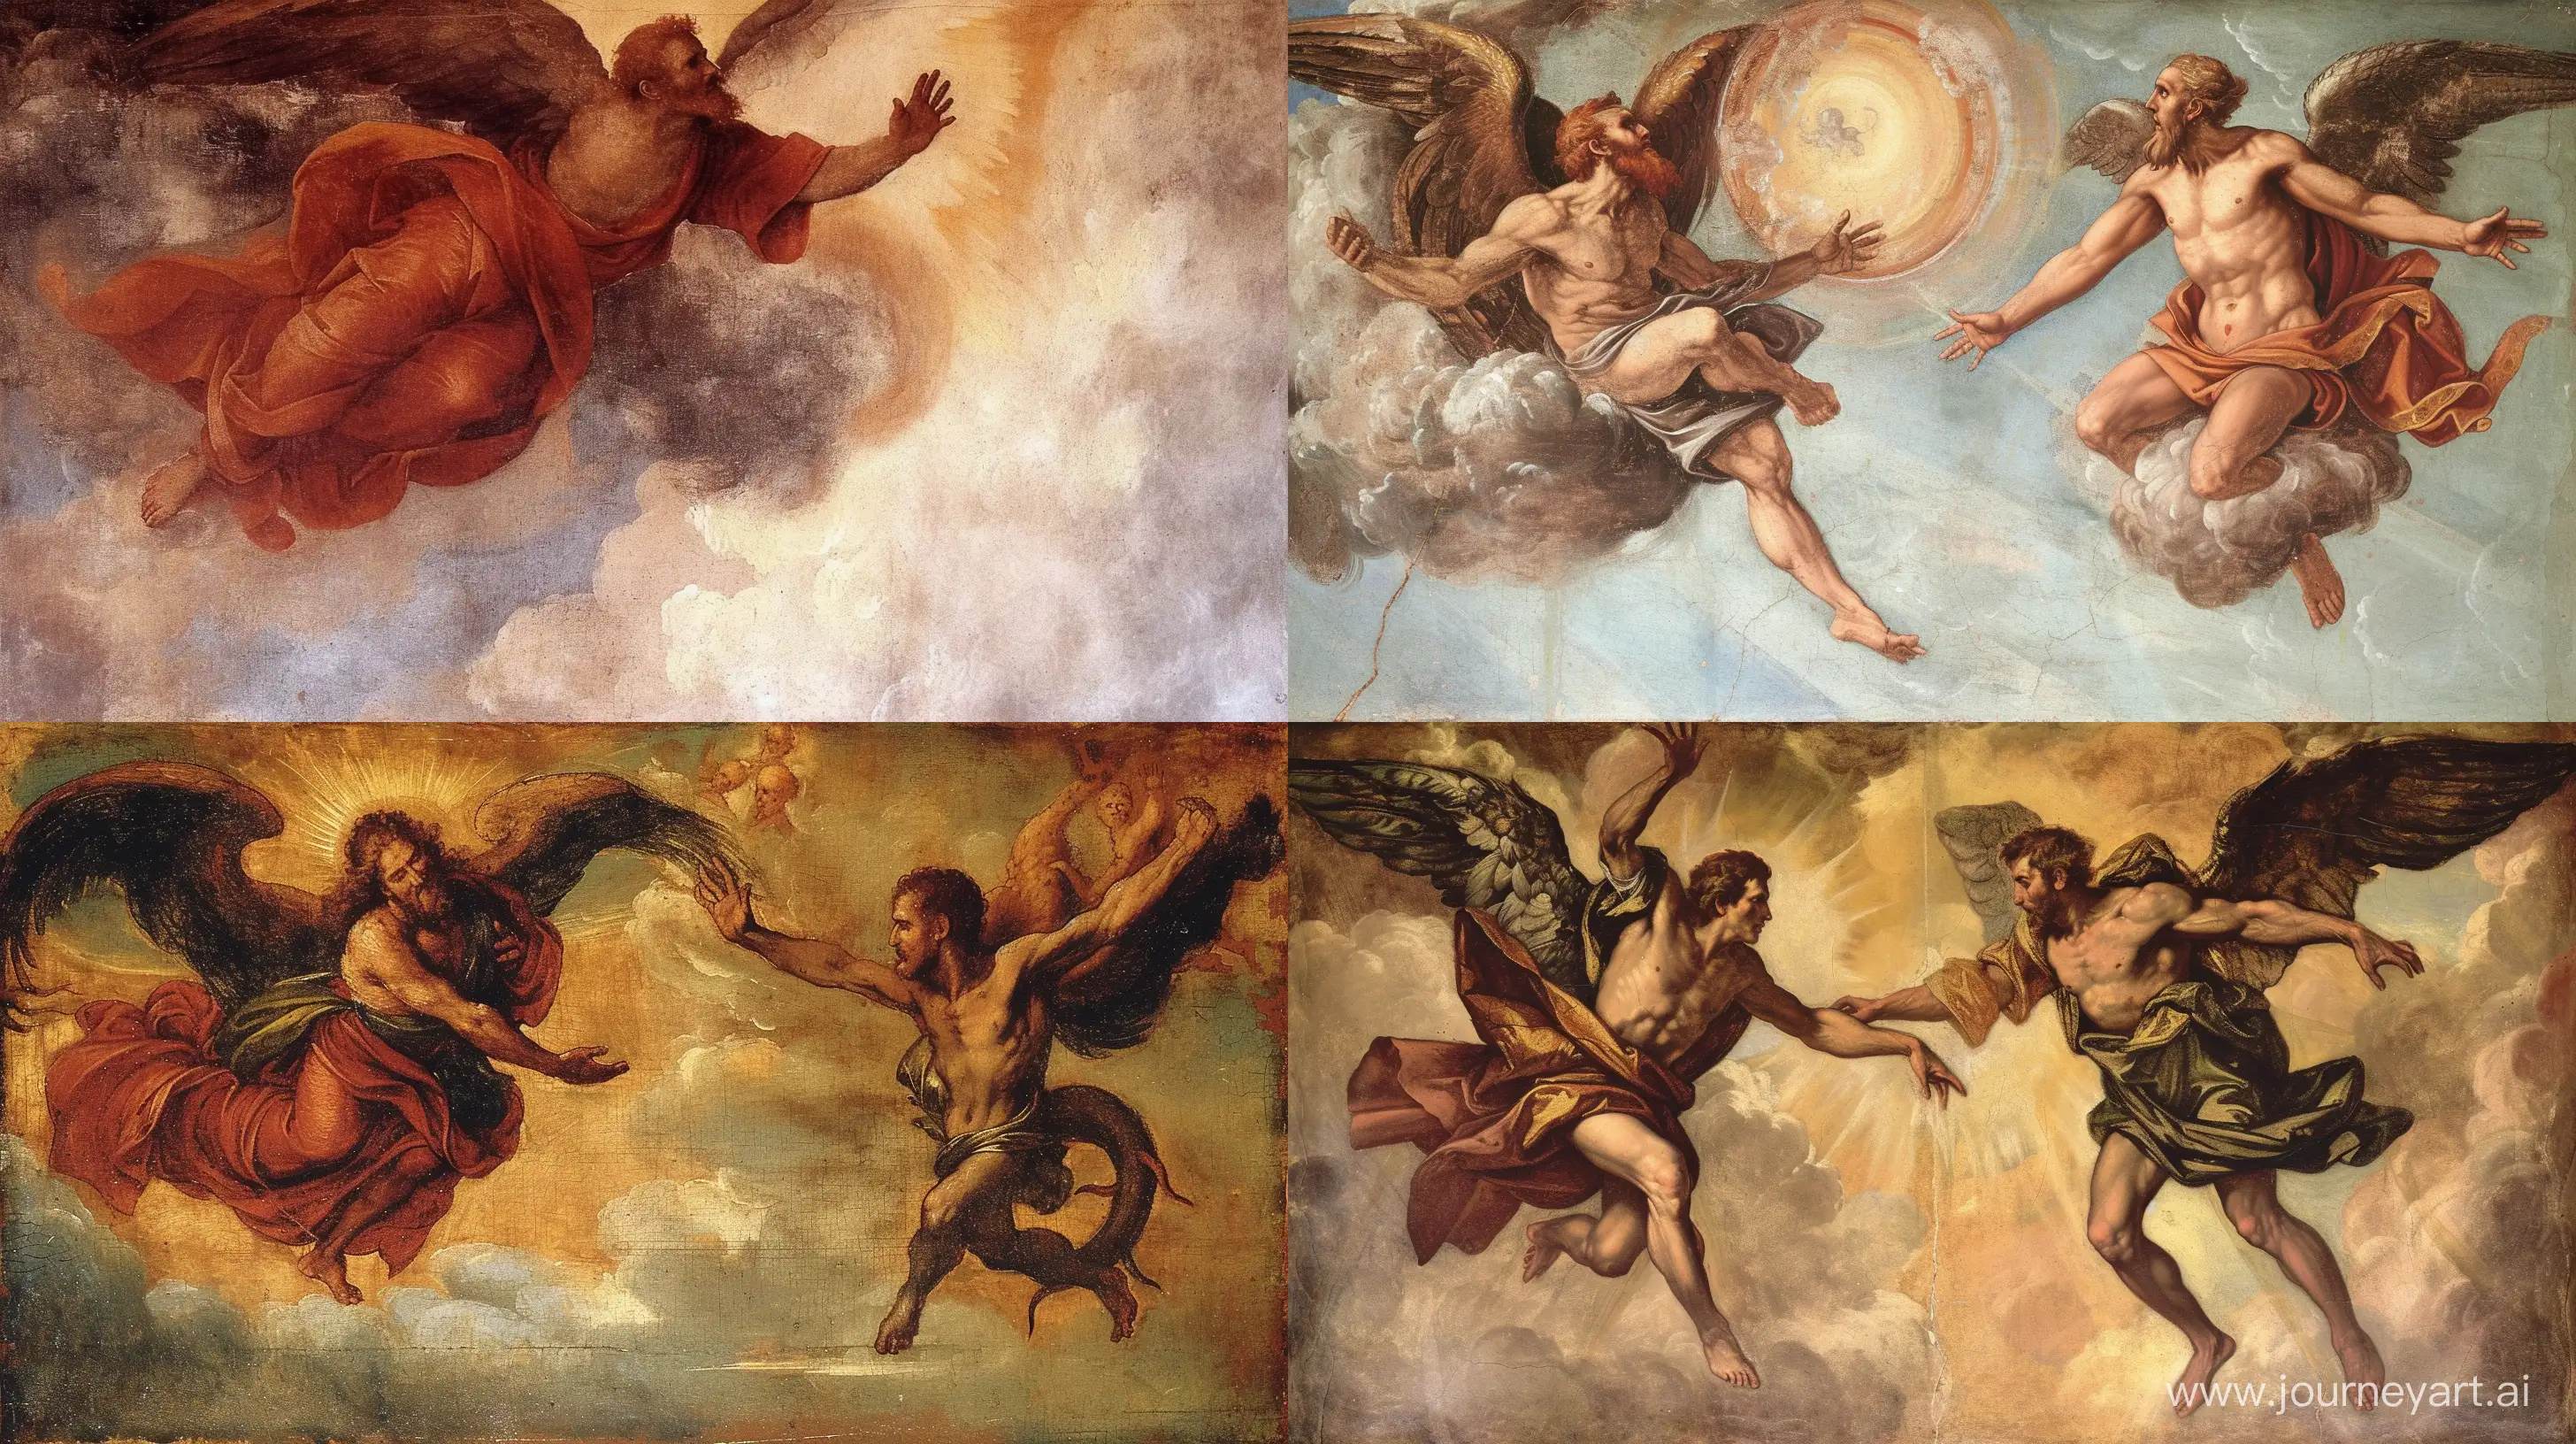 Satan was in heaven before Adam was created, realistic ,Renaissance and Christ era painting style, --ar 16:9 